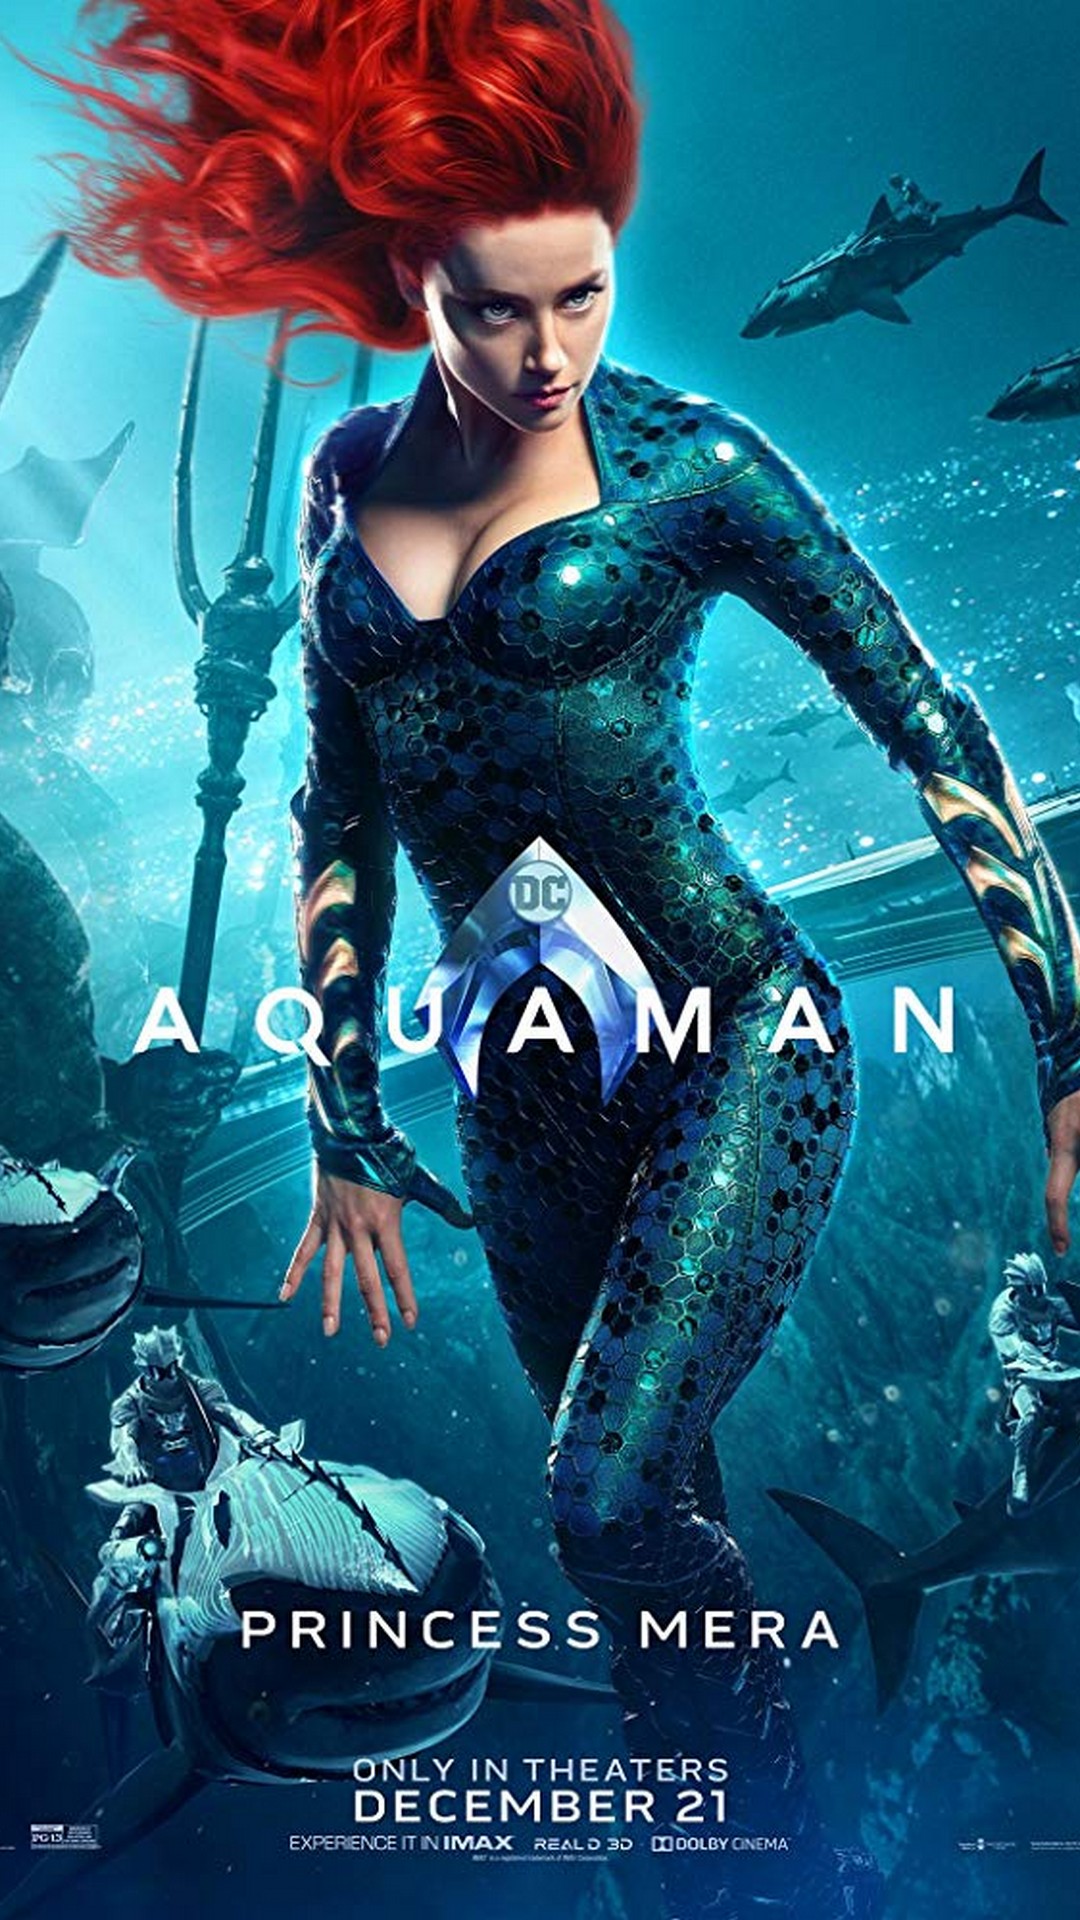 Wallpapers Phone Aquaman with resolution 1080X1920 pixel. You can make this wallpaper for your Android backgrounds, Tablet, Smartphones Screensavers and Mobile Phone Lock Screen